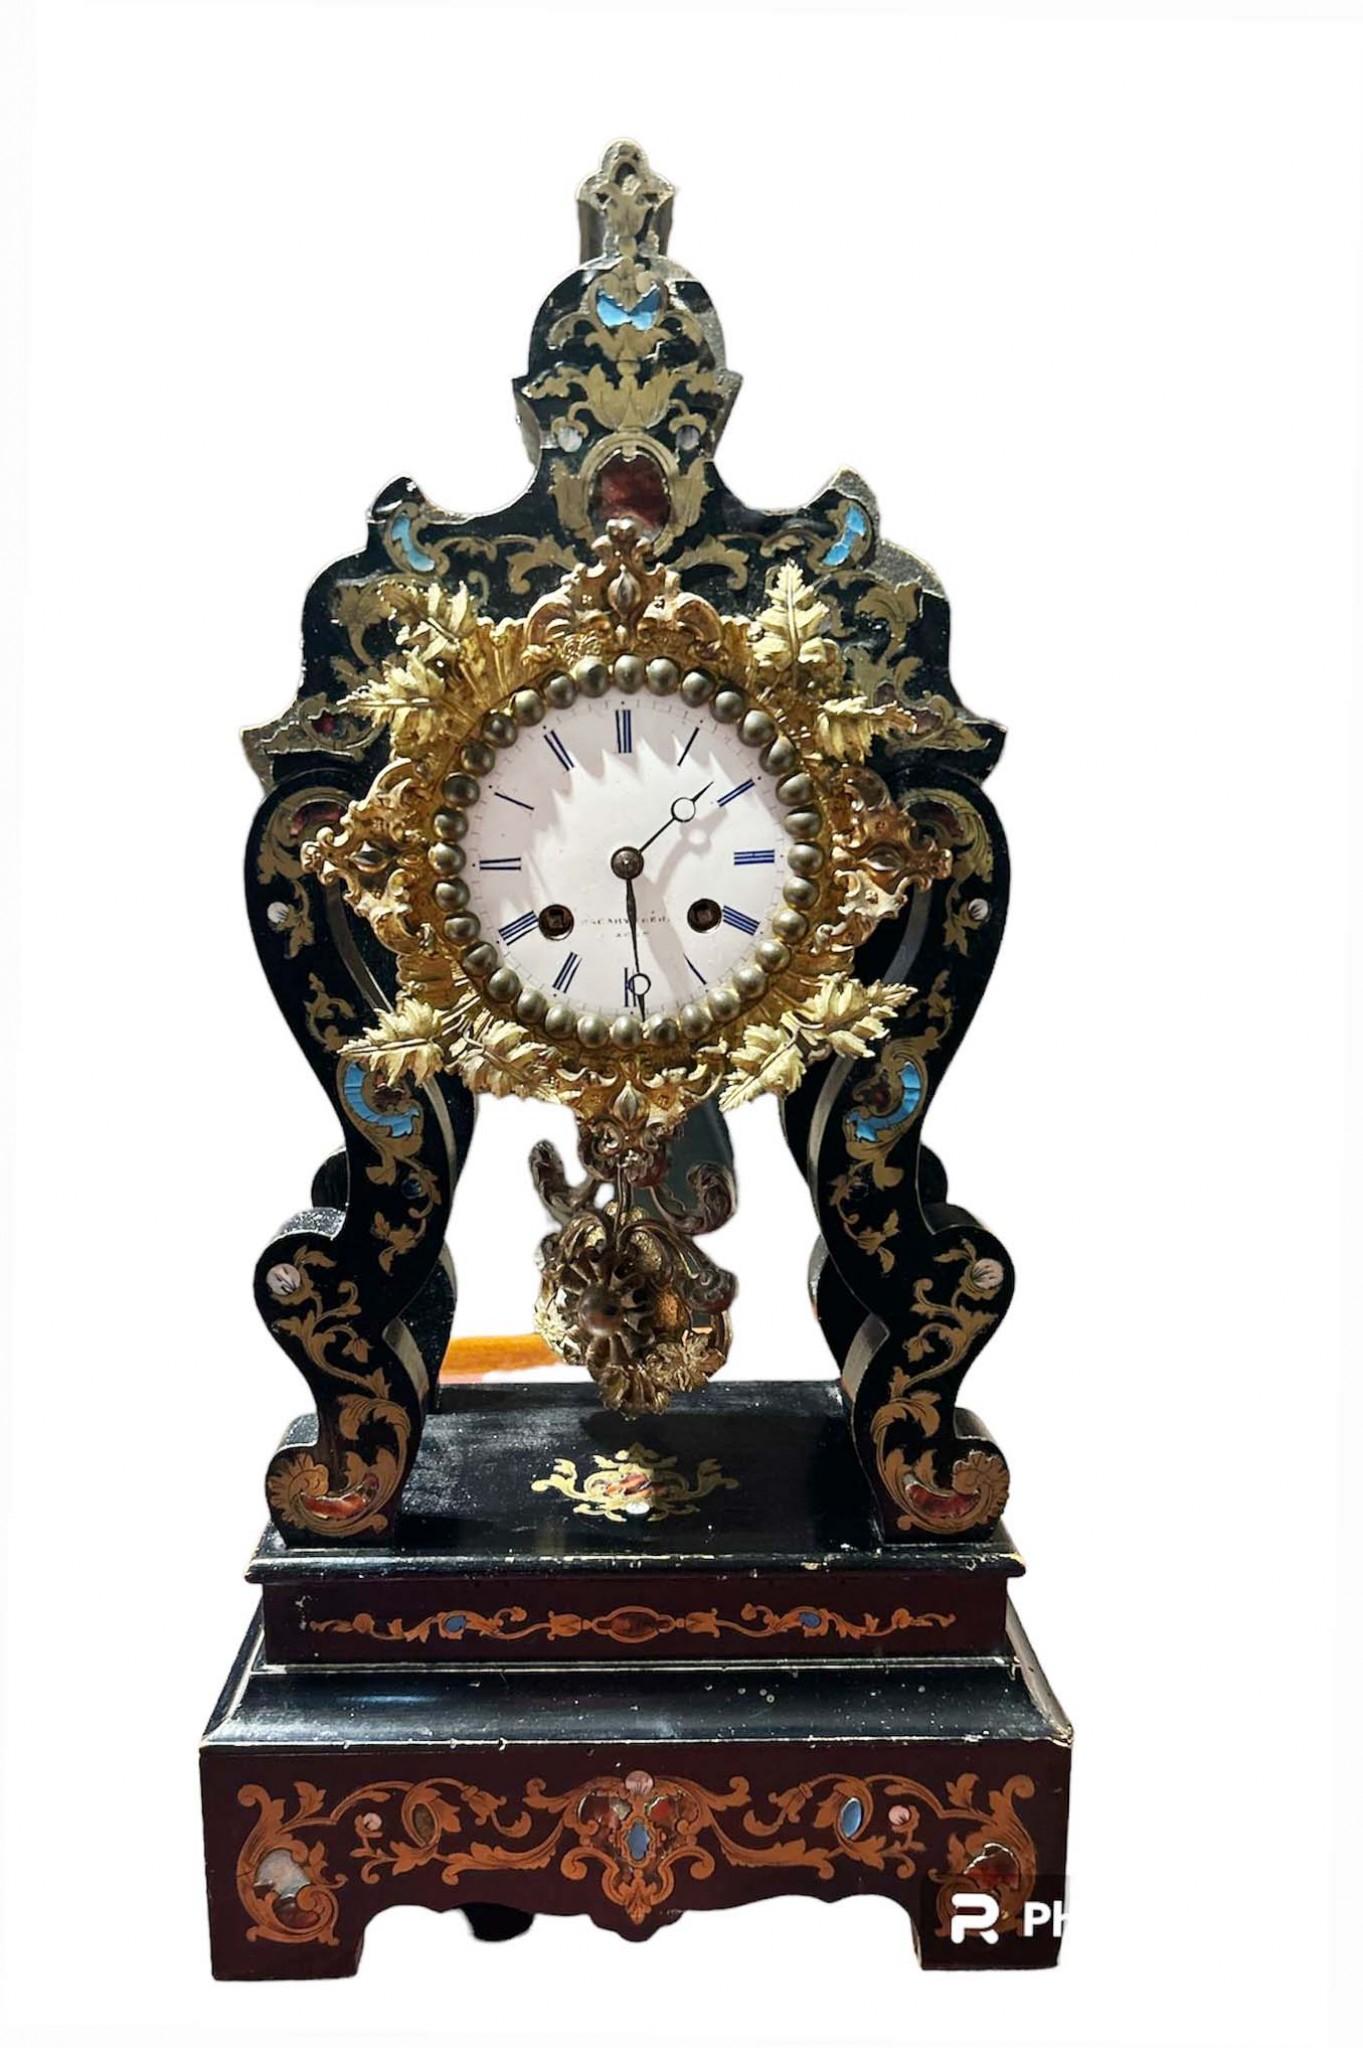 Gorgeous French antique mantle clock in the Boulle manner
Cut little clock we date to circa 1890
Love the Boulle inlay work with brass overlaid over ebony and tort
Ormolu is well cast and original patina
Purchased from a dealer on March Biron at